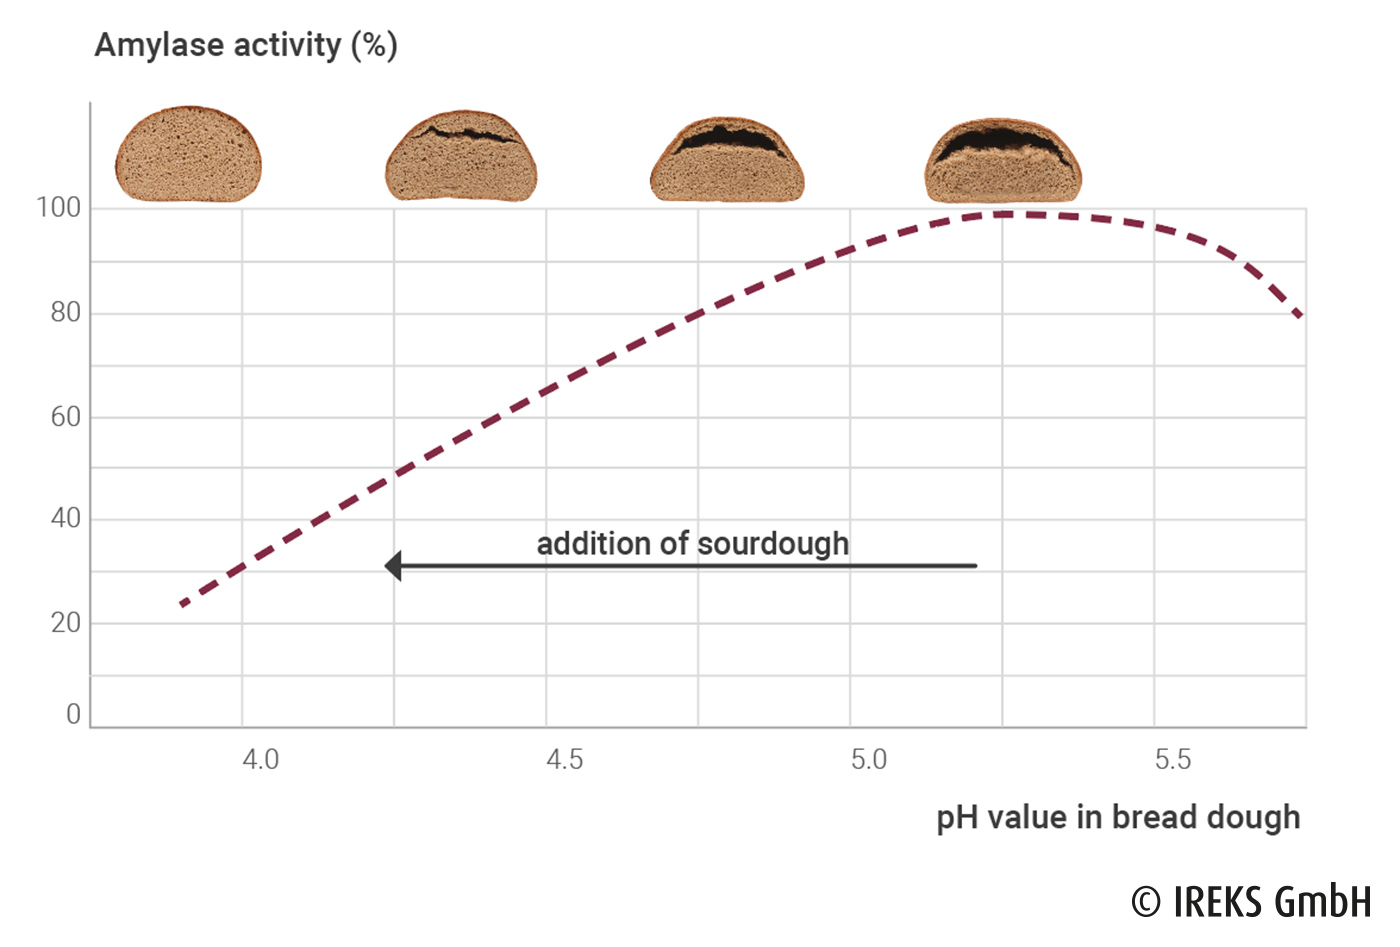 Influence of sourdough addition on pH value, amylase activity and baking behaviour 